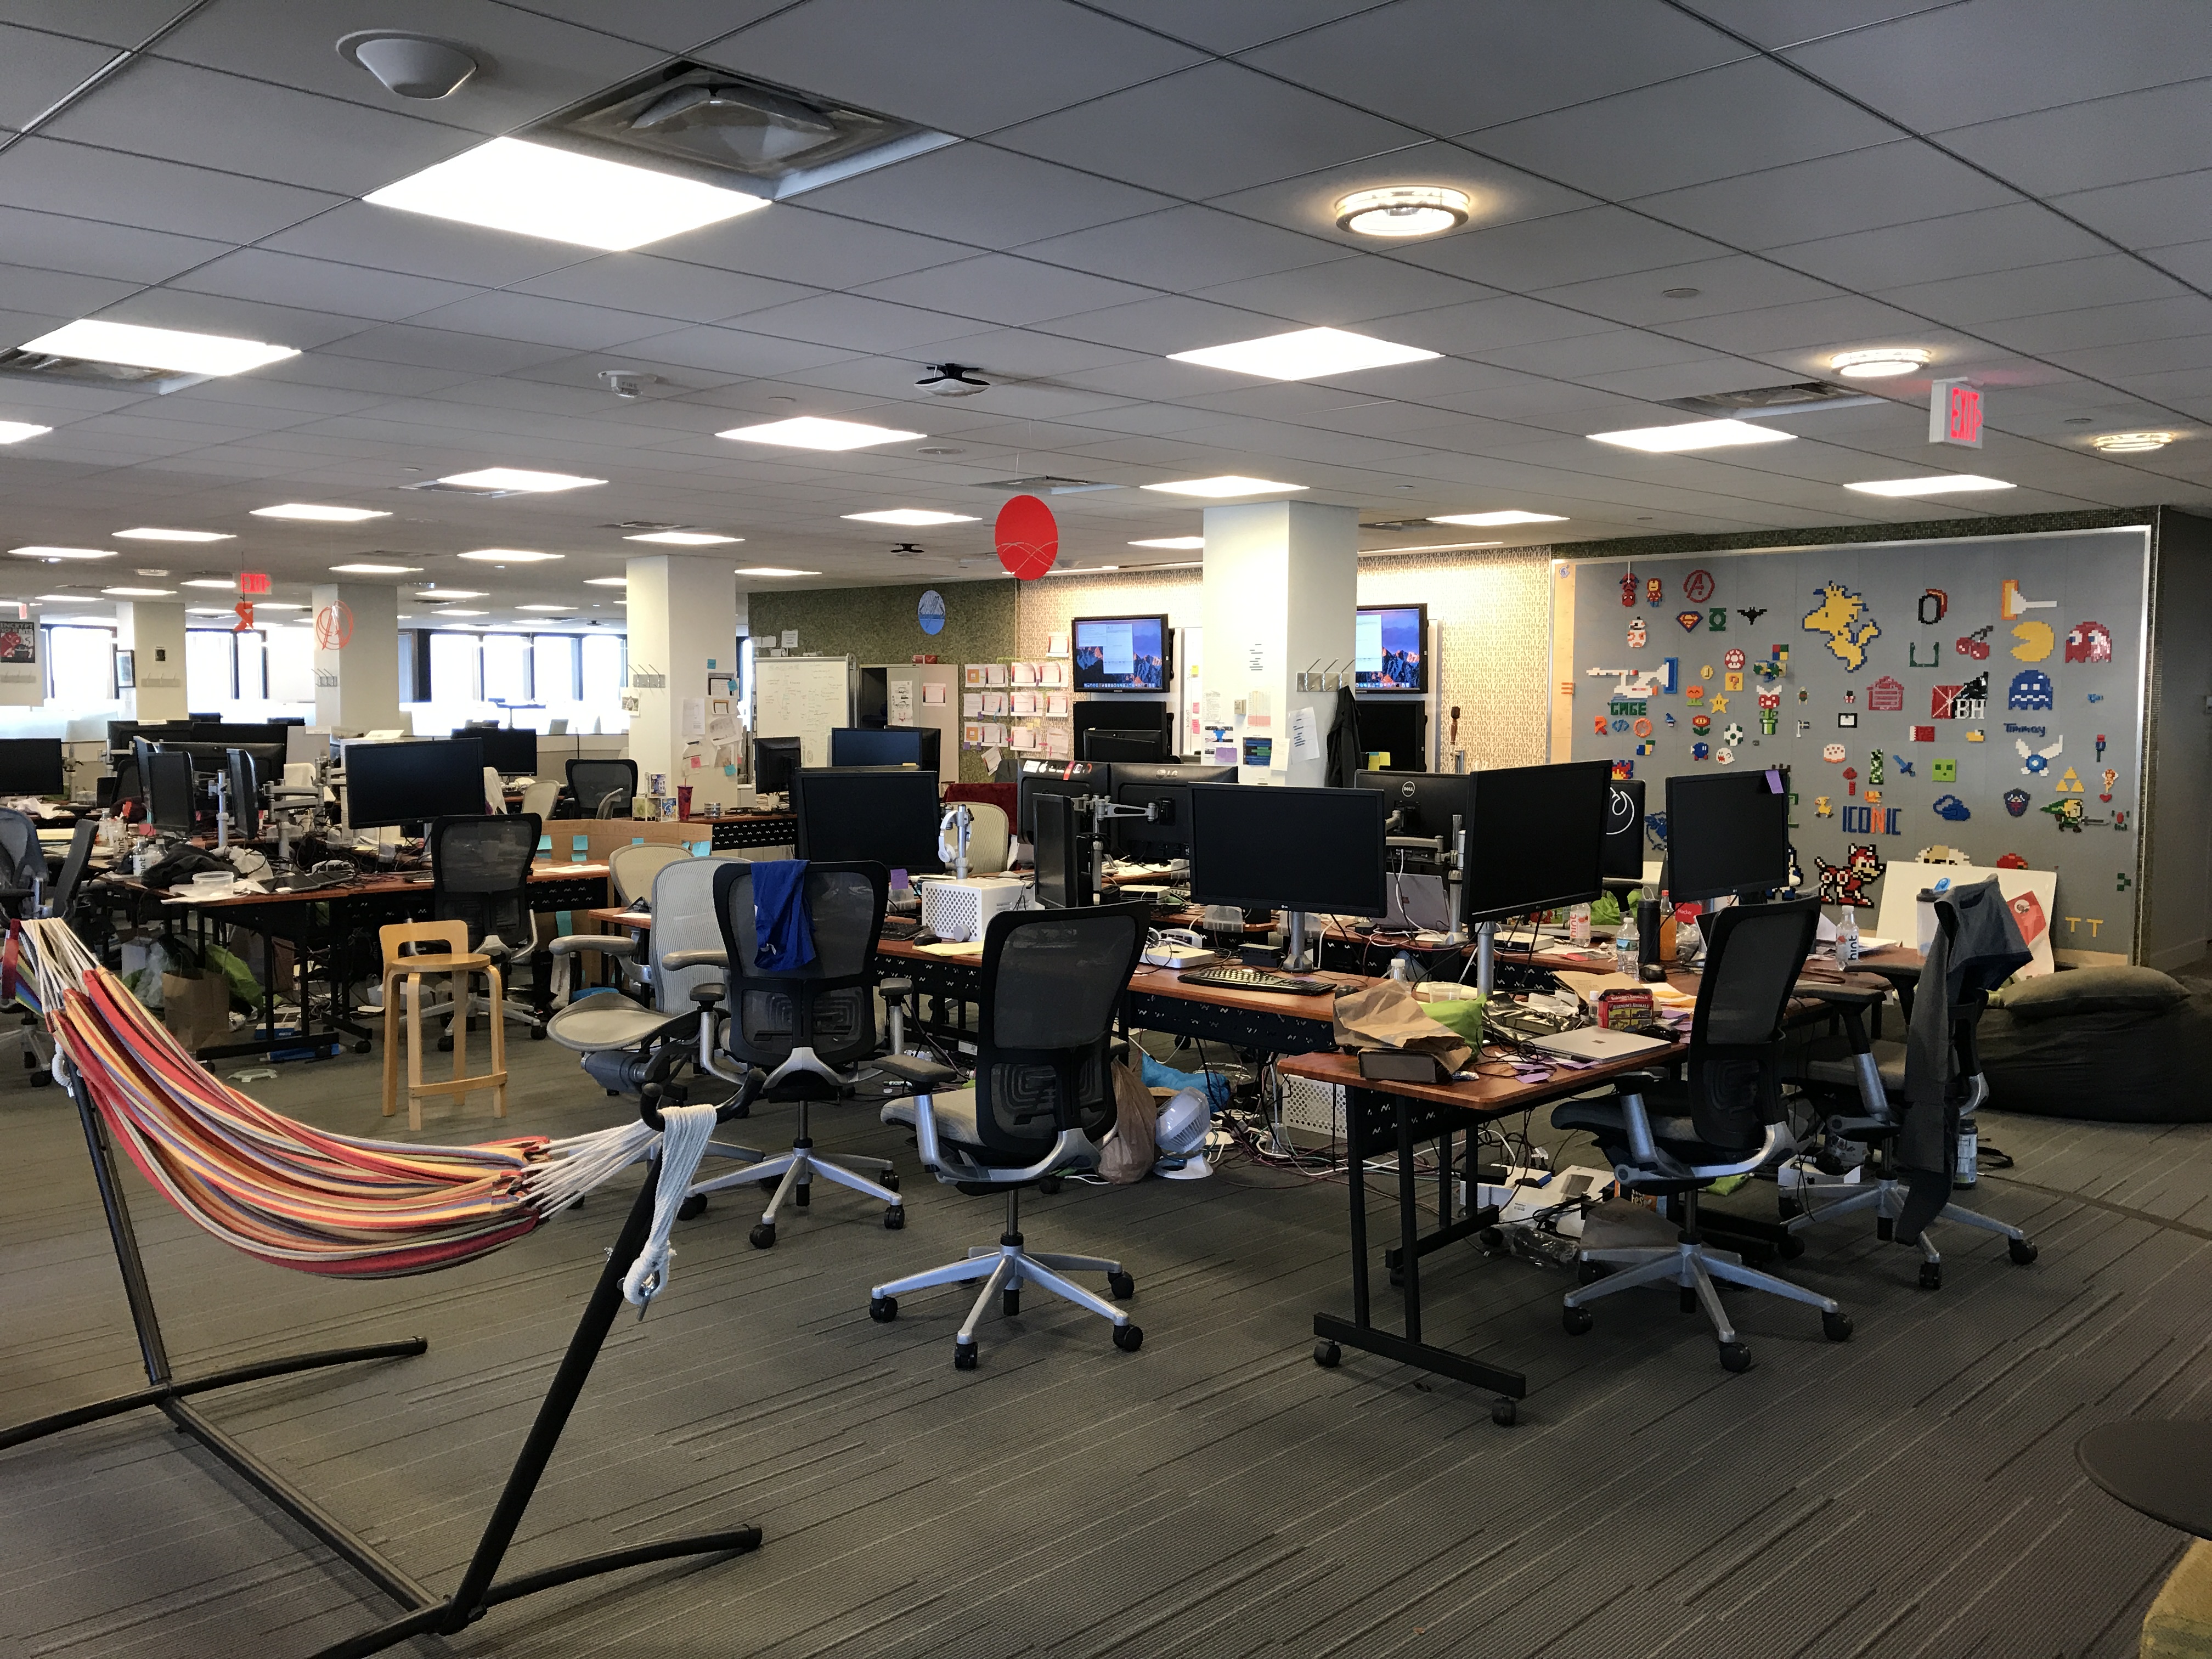 The Garage space at Microsoft New England's NERD.